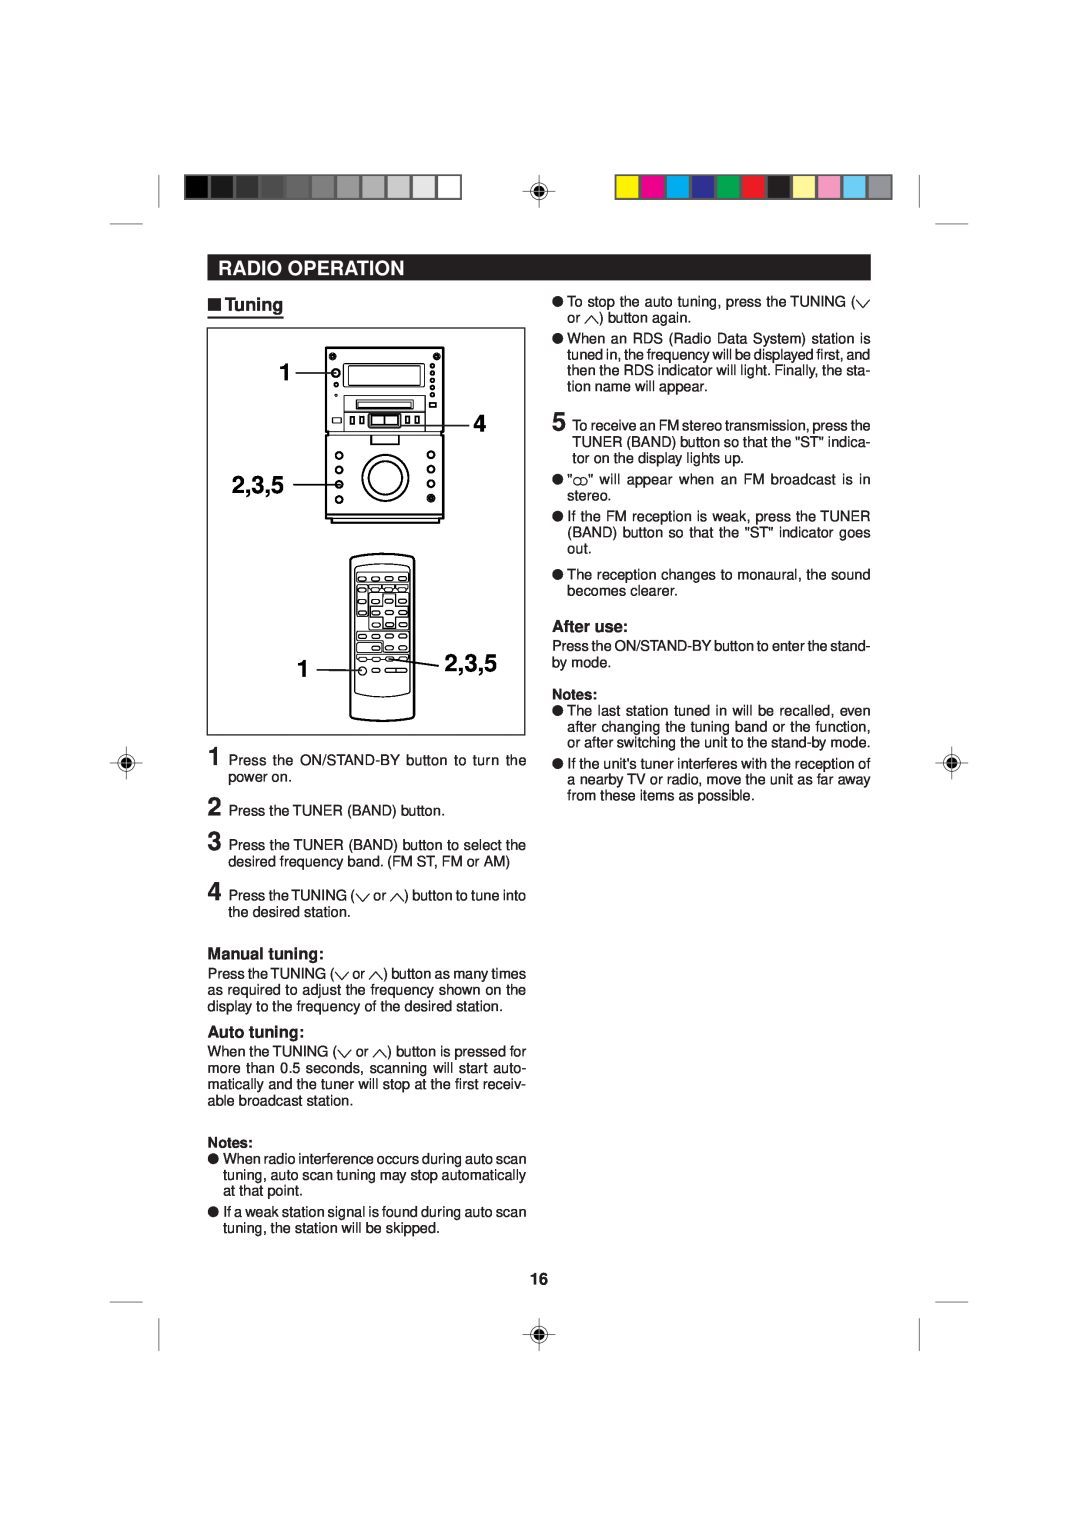 Sharp MD-M1H operation manual 2,3,5 1 2,3,5, Radio Operation, Tuning, Manual tuning, Auto tuning, After use 